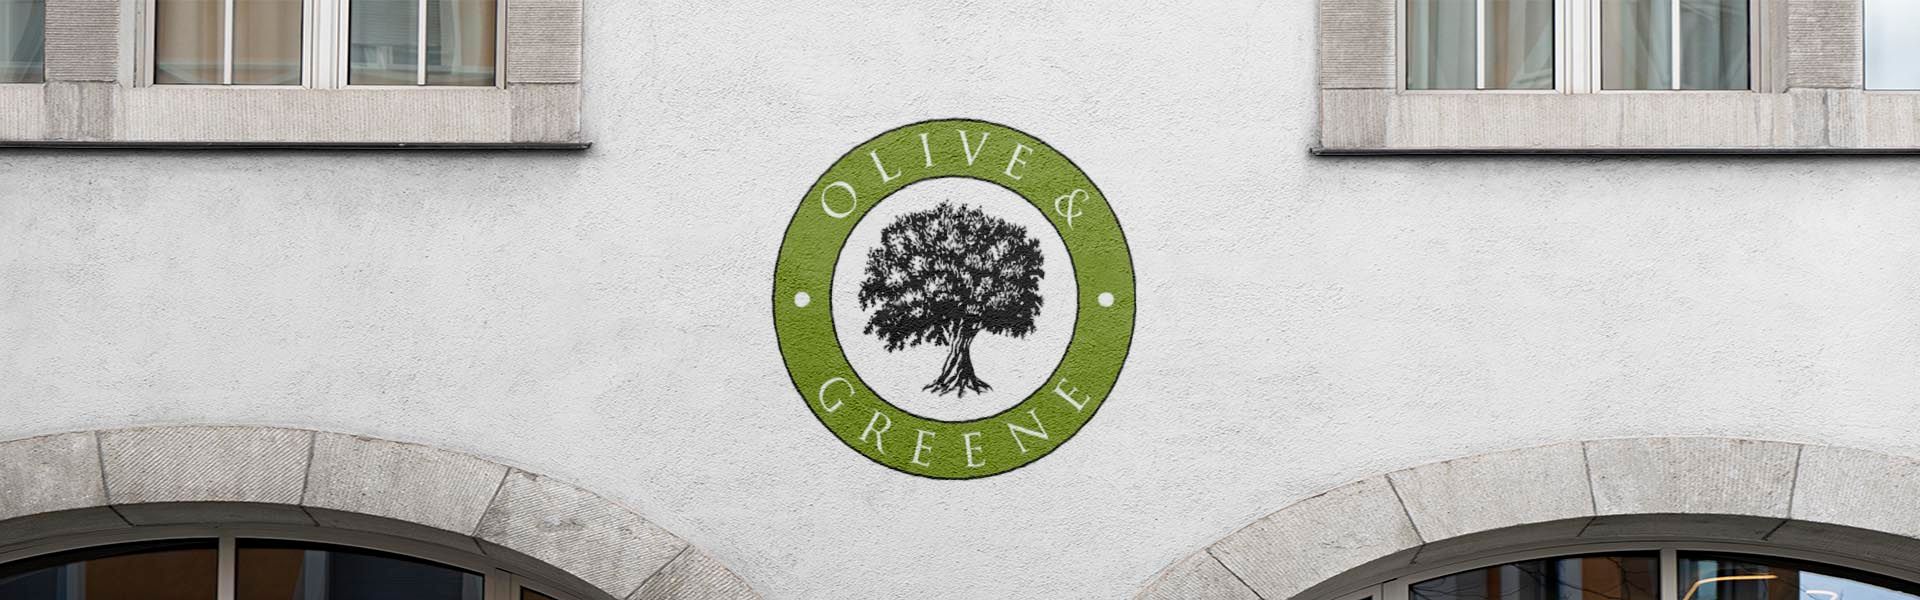 a sign on a building that says olive & greene